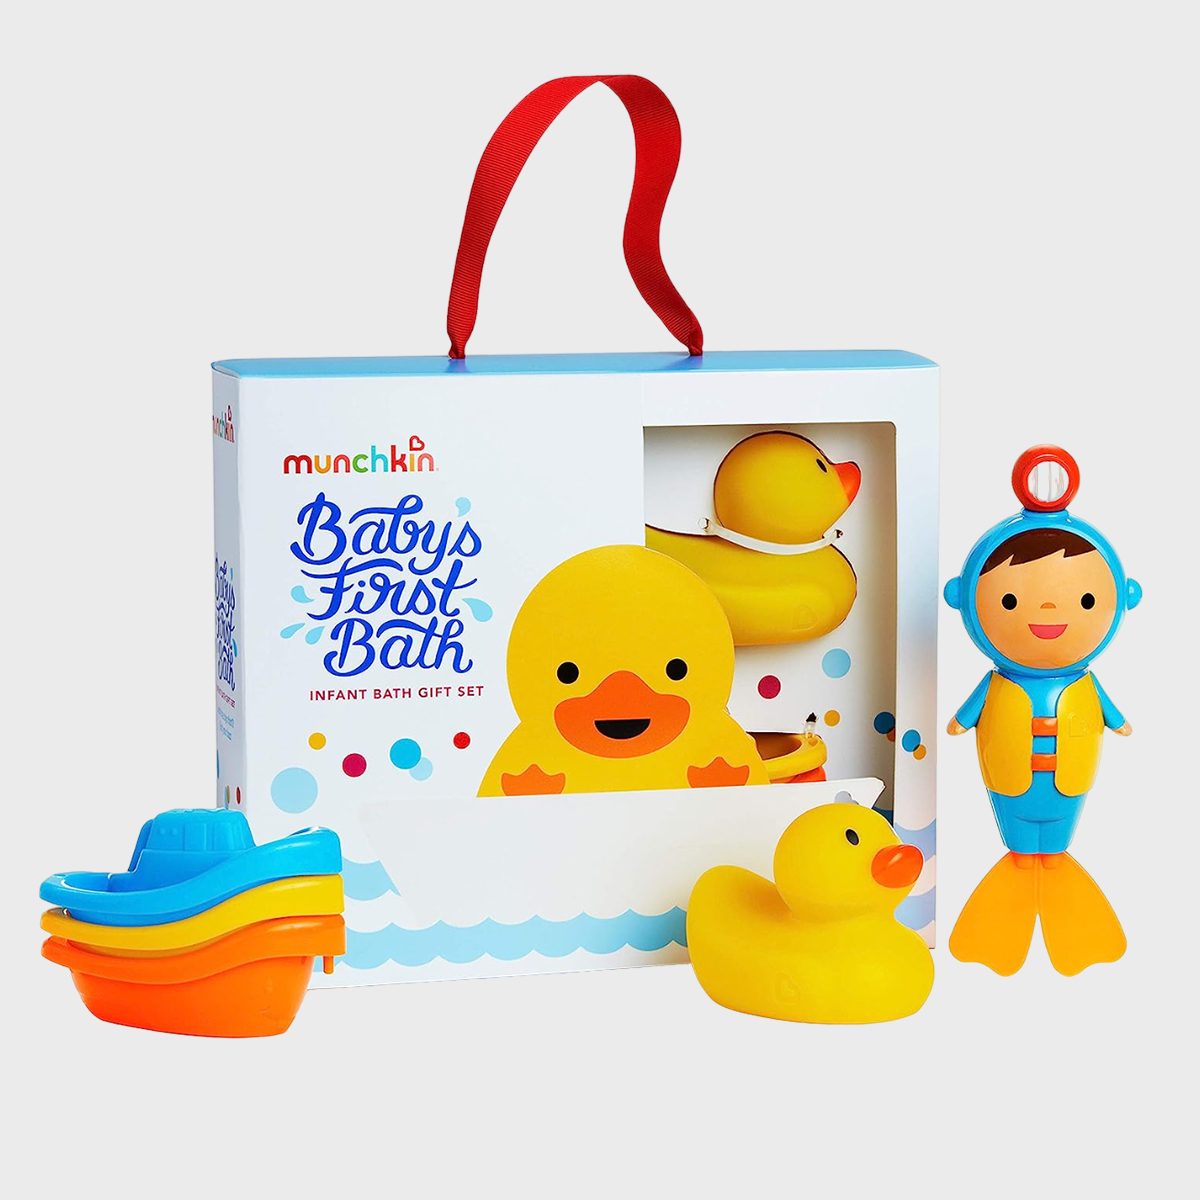 <p>An adorable rubber ducky <a href="https://www.amazon.com/Munchkin-Babys-First-Bath-Piece/dp/B07X85CZMK" rel="nofollow noopener noreferrer">bath toy gift set</a> that comes in a ready-to-wrap box? Yes, please. This fun set is easily one of the most popular baby gifts under $20, and one of the most frequently requested items on the Amazon Baby Registry—even if parents do have to learn <a href="https://www.rd.com/list/clean-toys-to-remove-mold/" rel="noopener noreferrer">how to clean bath toys</a> to prevent mold. Little ones will play with the yellow duck, swimming friend and floaty boaties happily for years.</p> <p class="listicle-page__cta-button-shop"><a class="shop-btn" href="https://www.amazon.com/Munchkin-Babys-First-Bath-Piece/dp/B07X85CZMK">Shop Now</a></p>